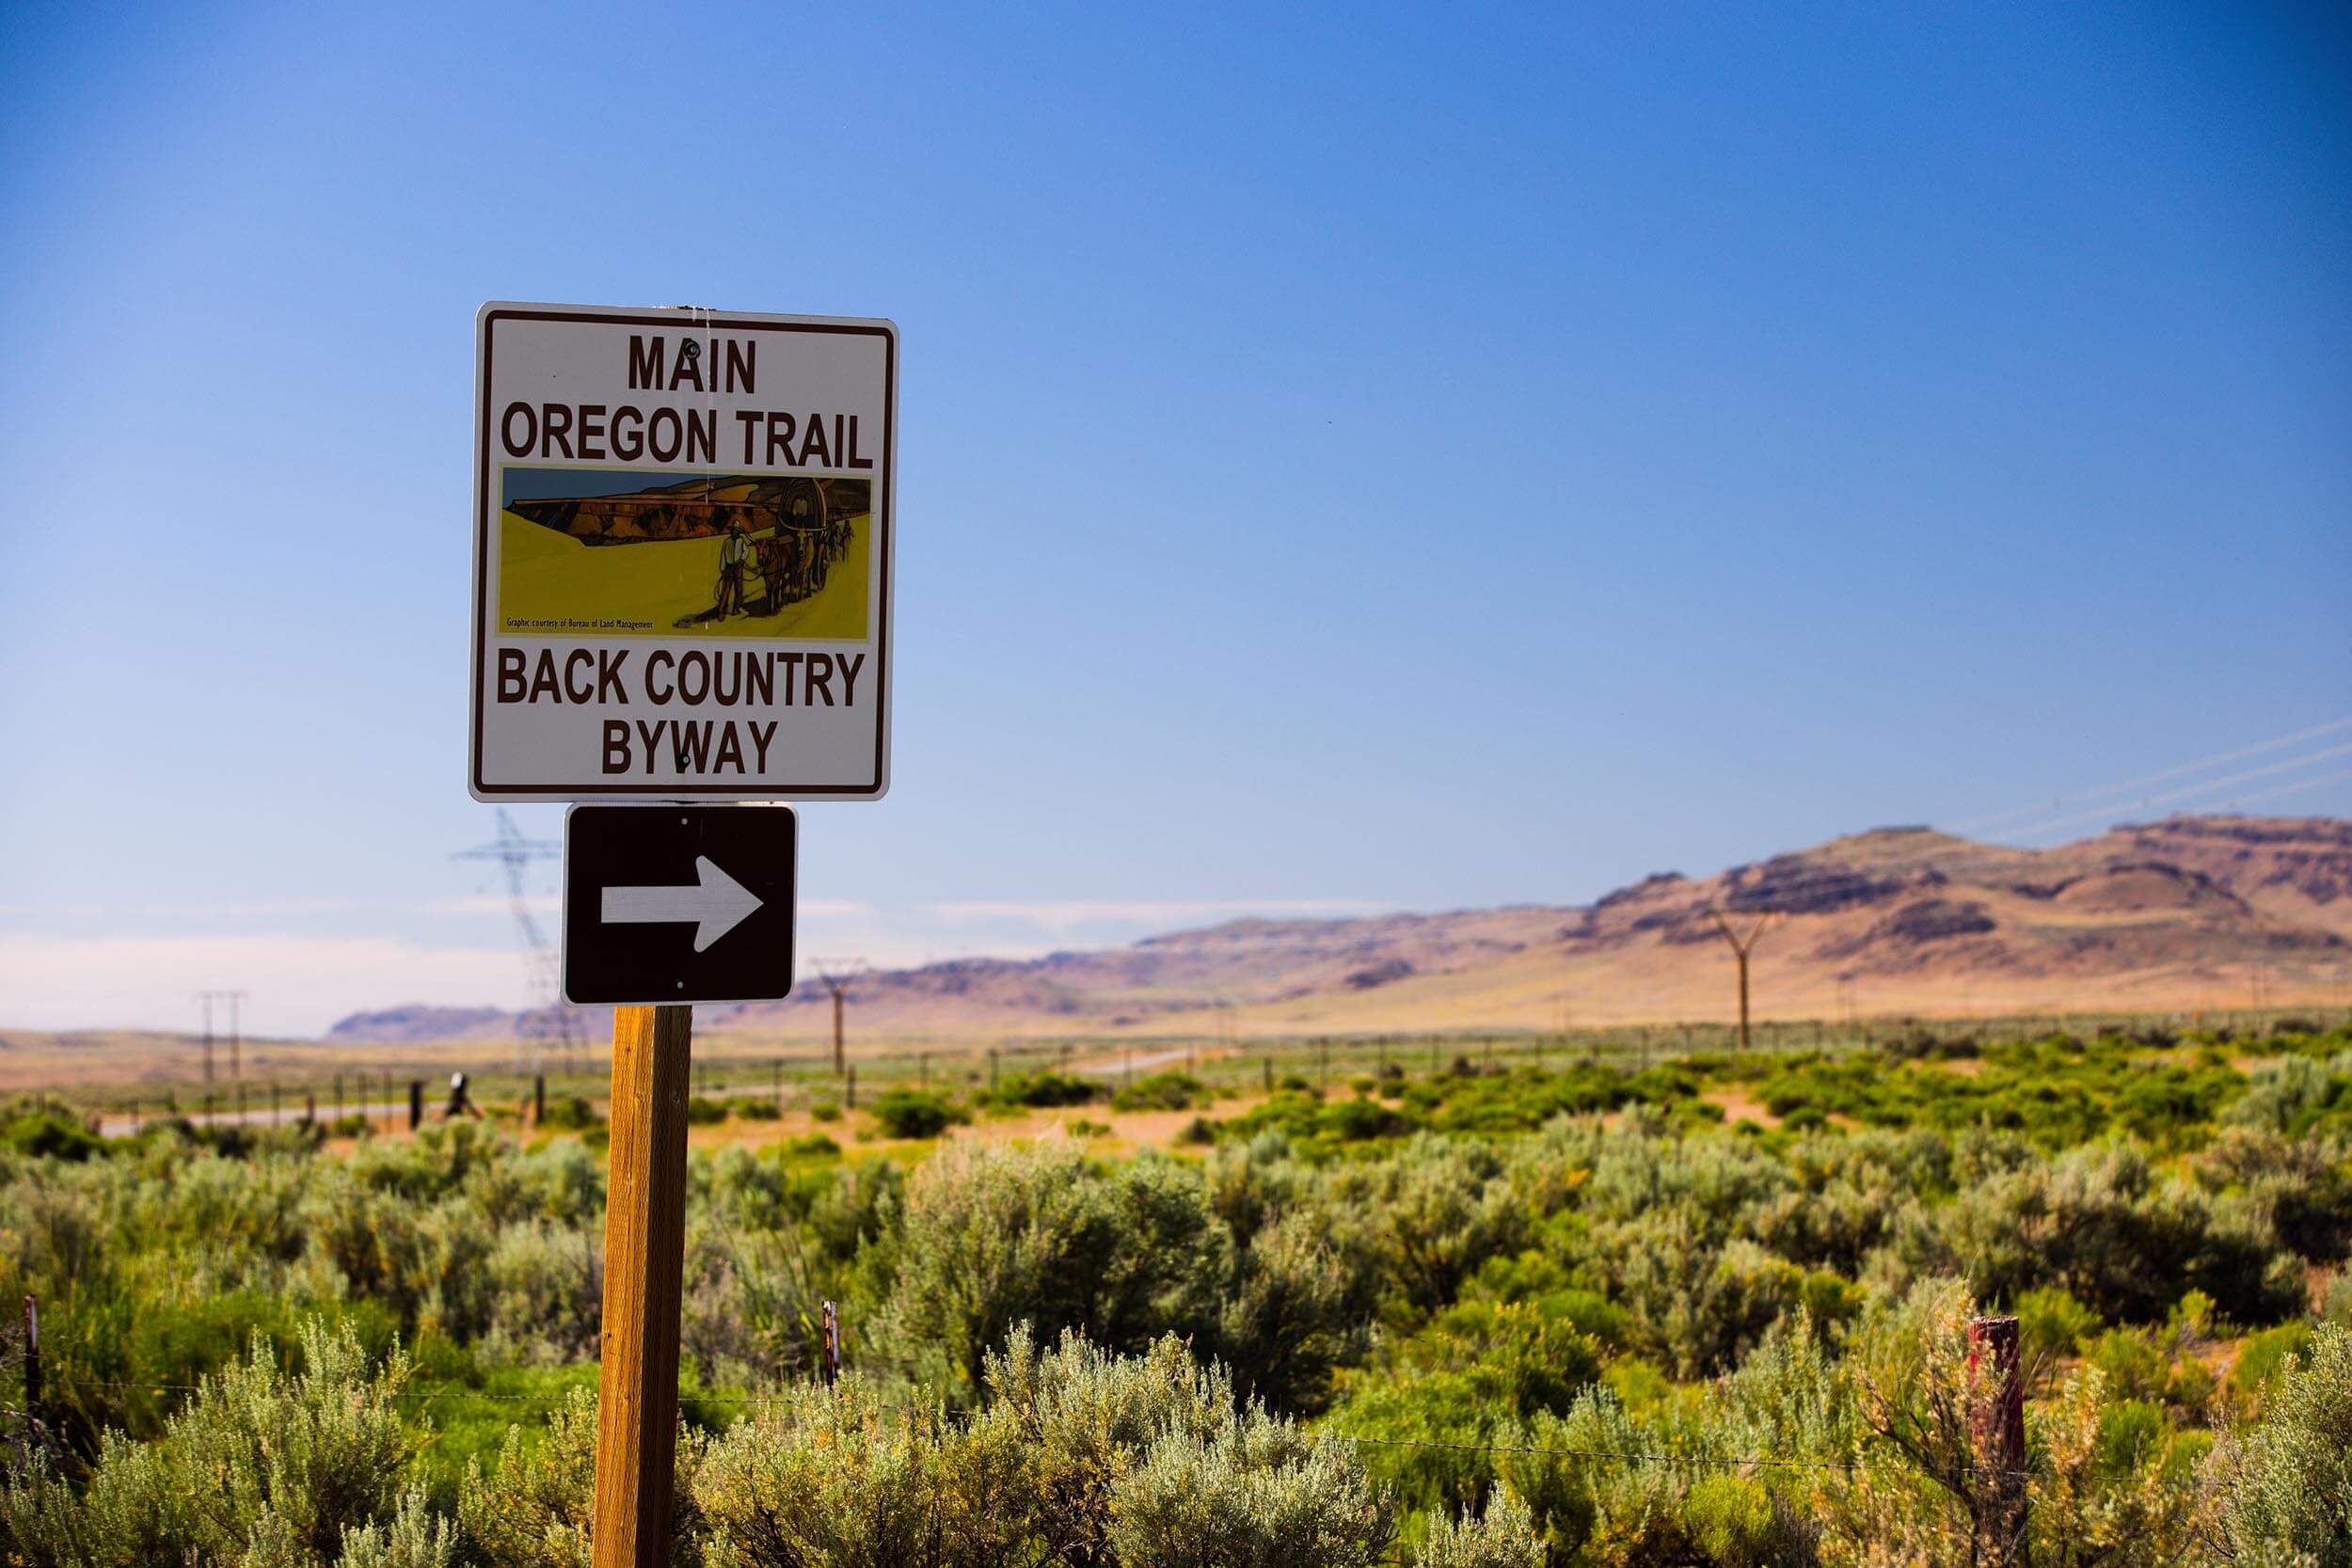 main oregon trail backcountry byway sign beside a field of desert shrubs with mountains in the distance